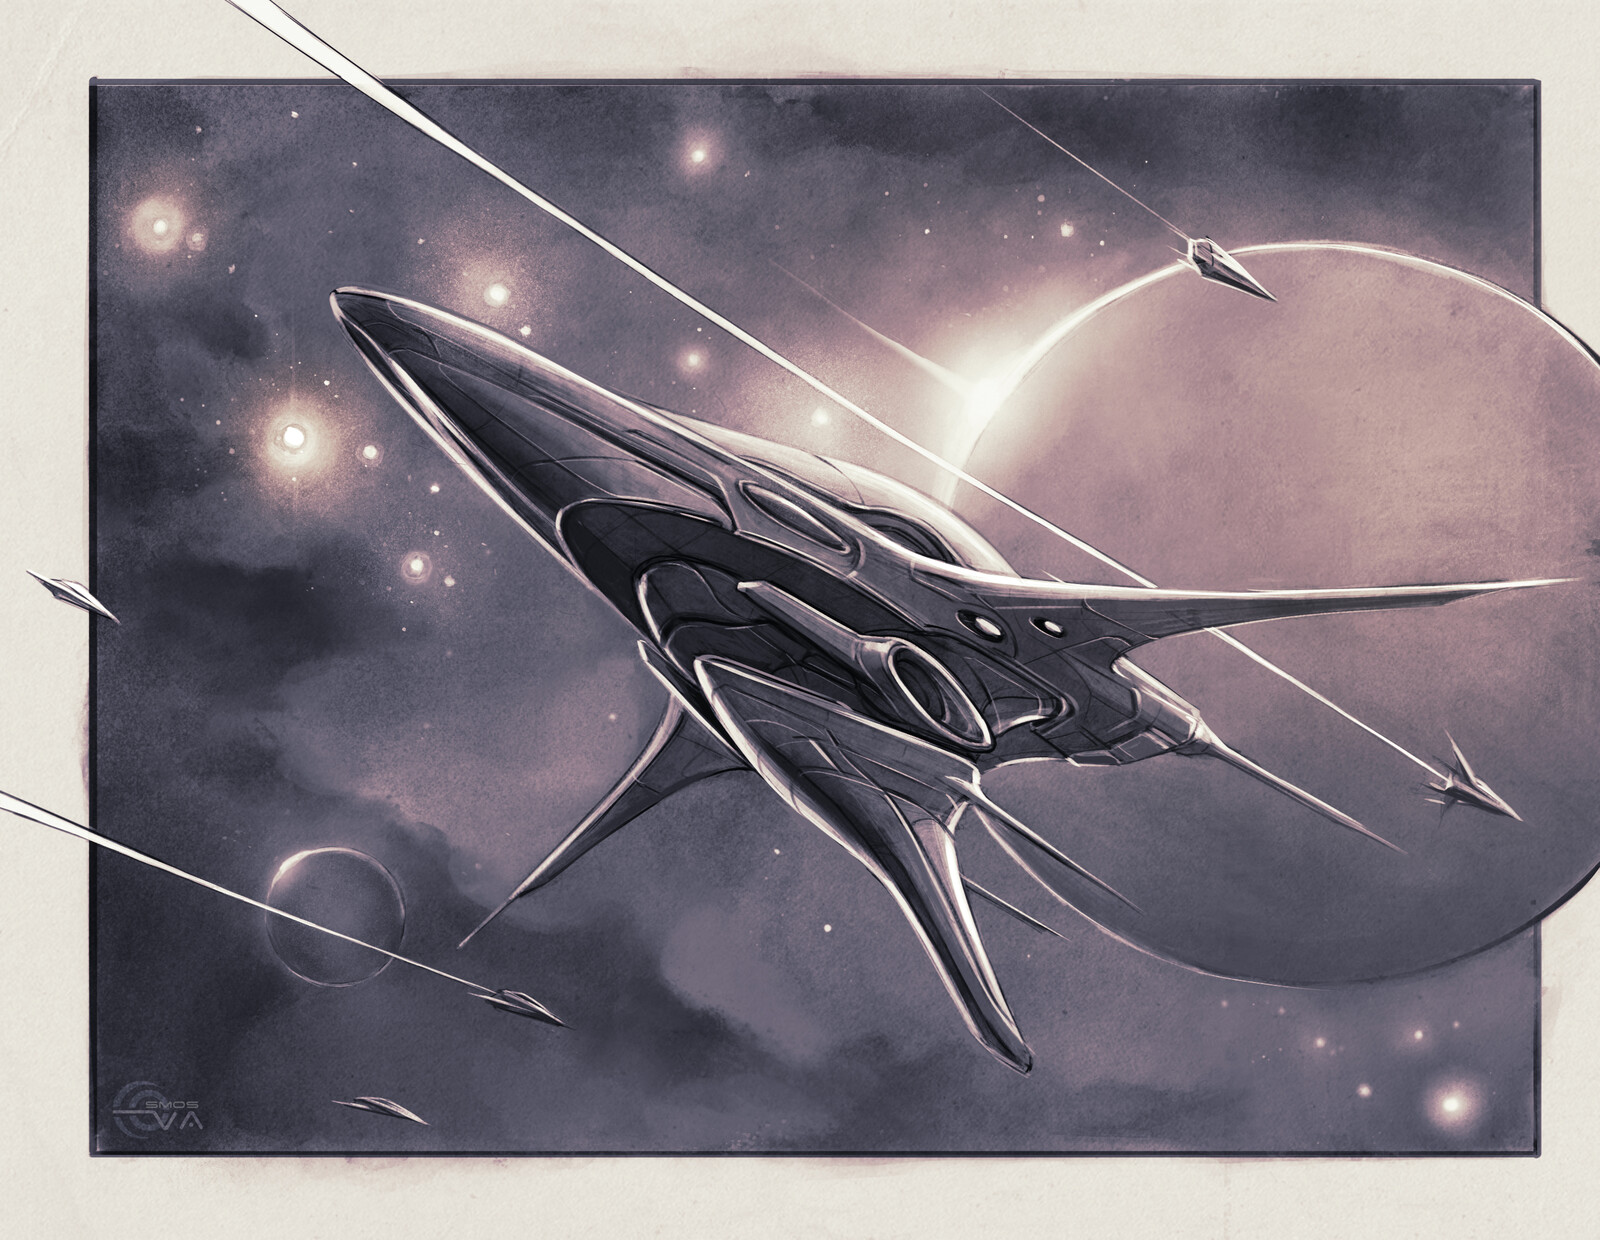 Day 8. Starship.
Frigate-Scout for the personal project Dead Stars.